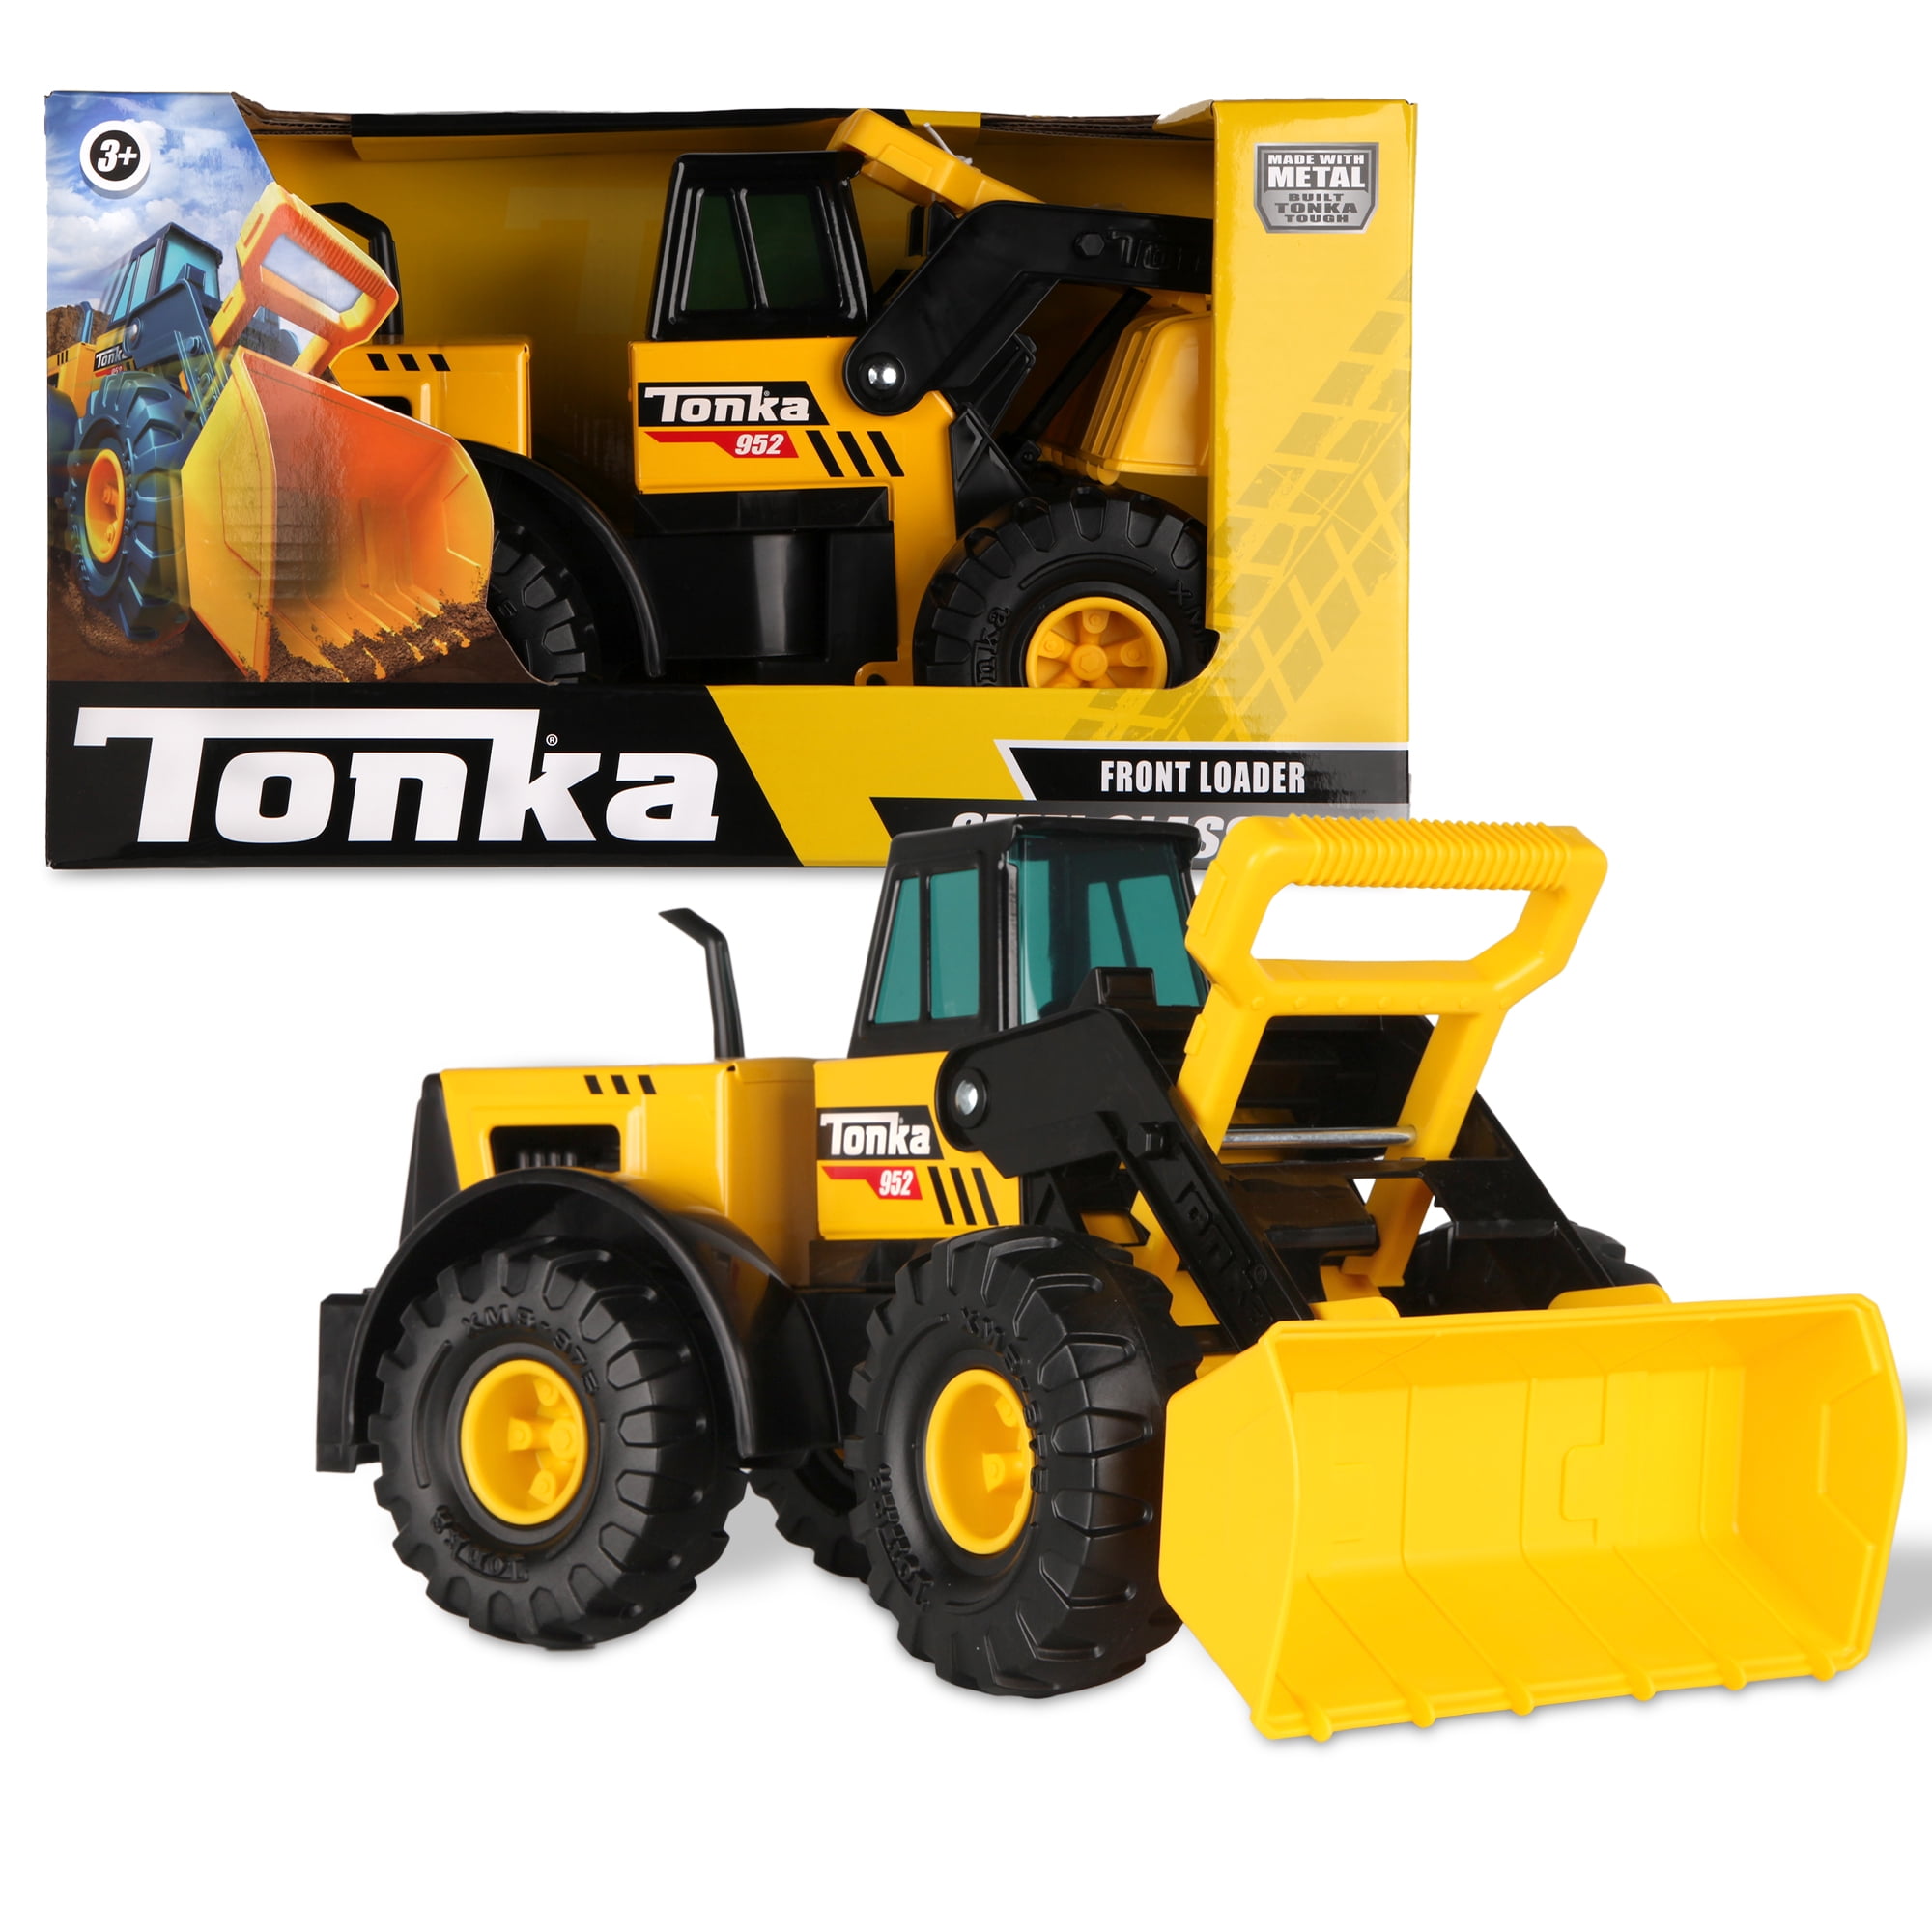 Tonka 90697 Classic Steel Front Loader Vehicle for sale online 